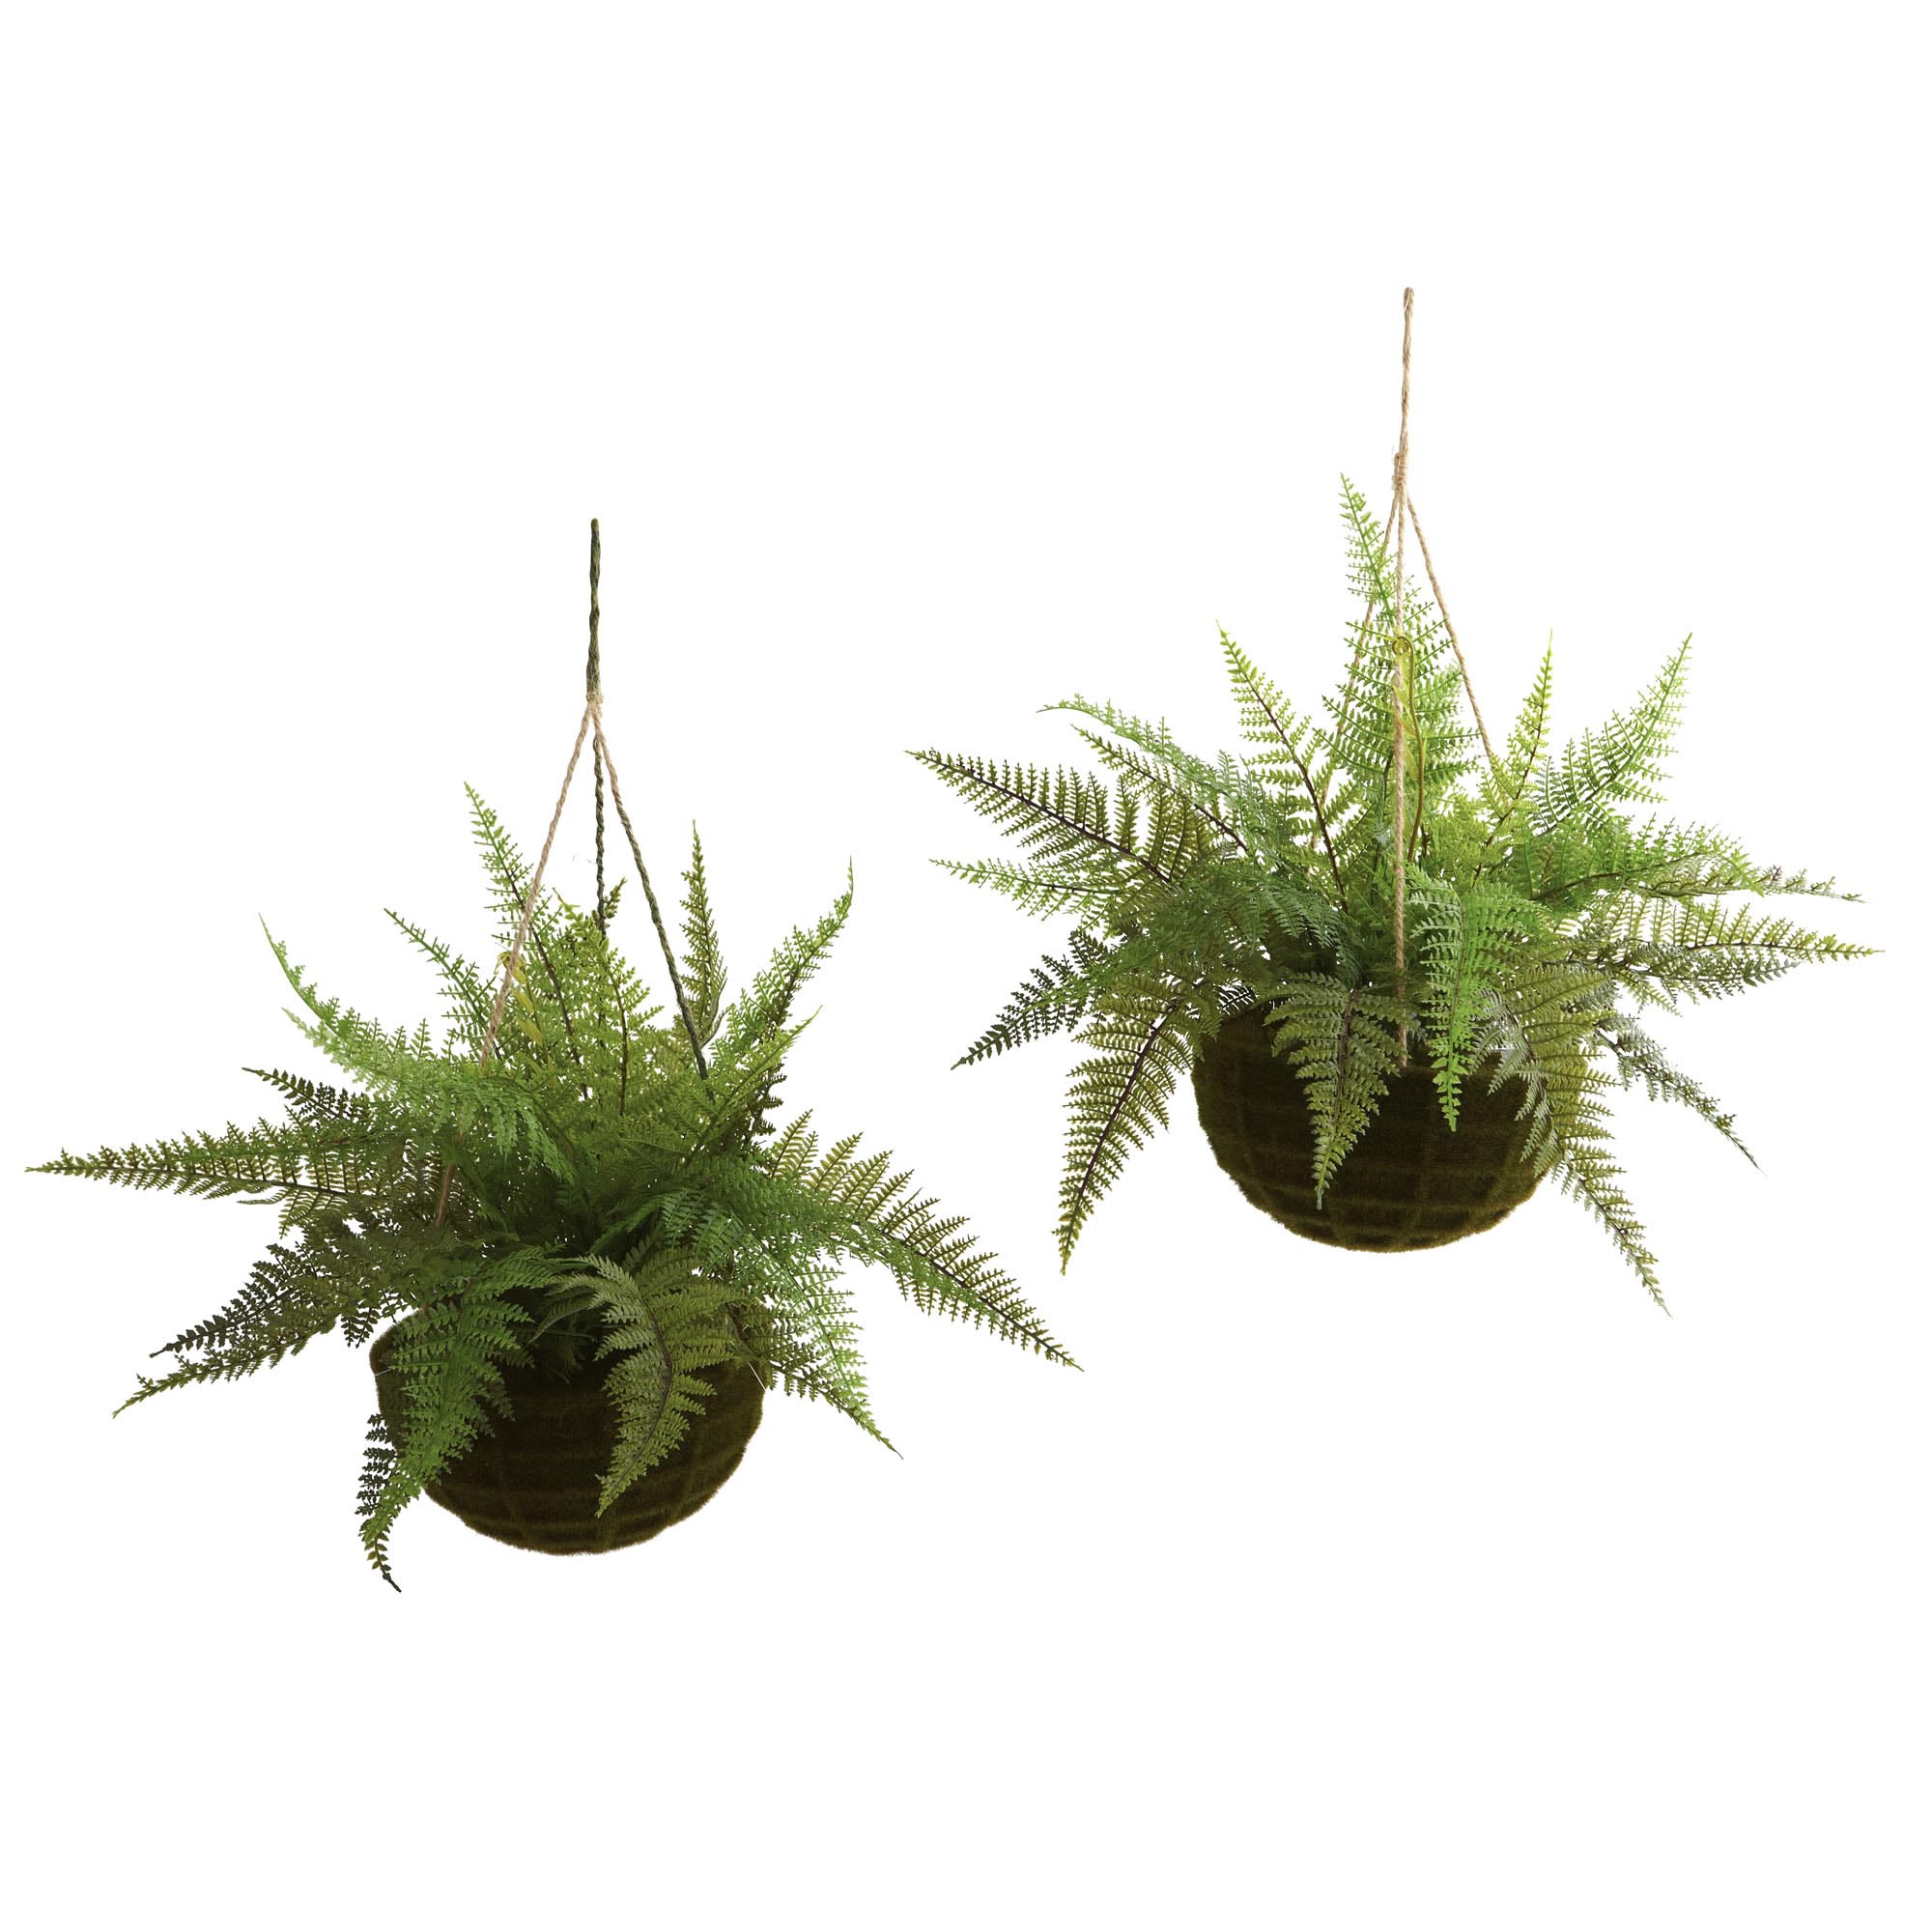 18 Inch Outdoor Leather Fern In Mossy Hanging Basket (set Of 2) Limited Uv Protection